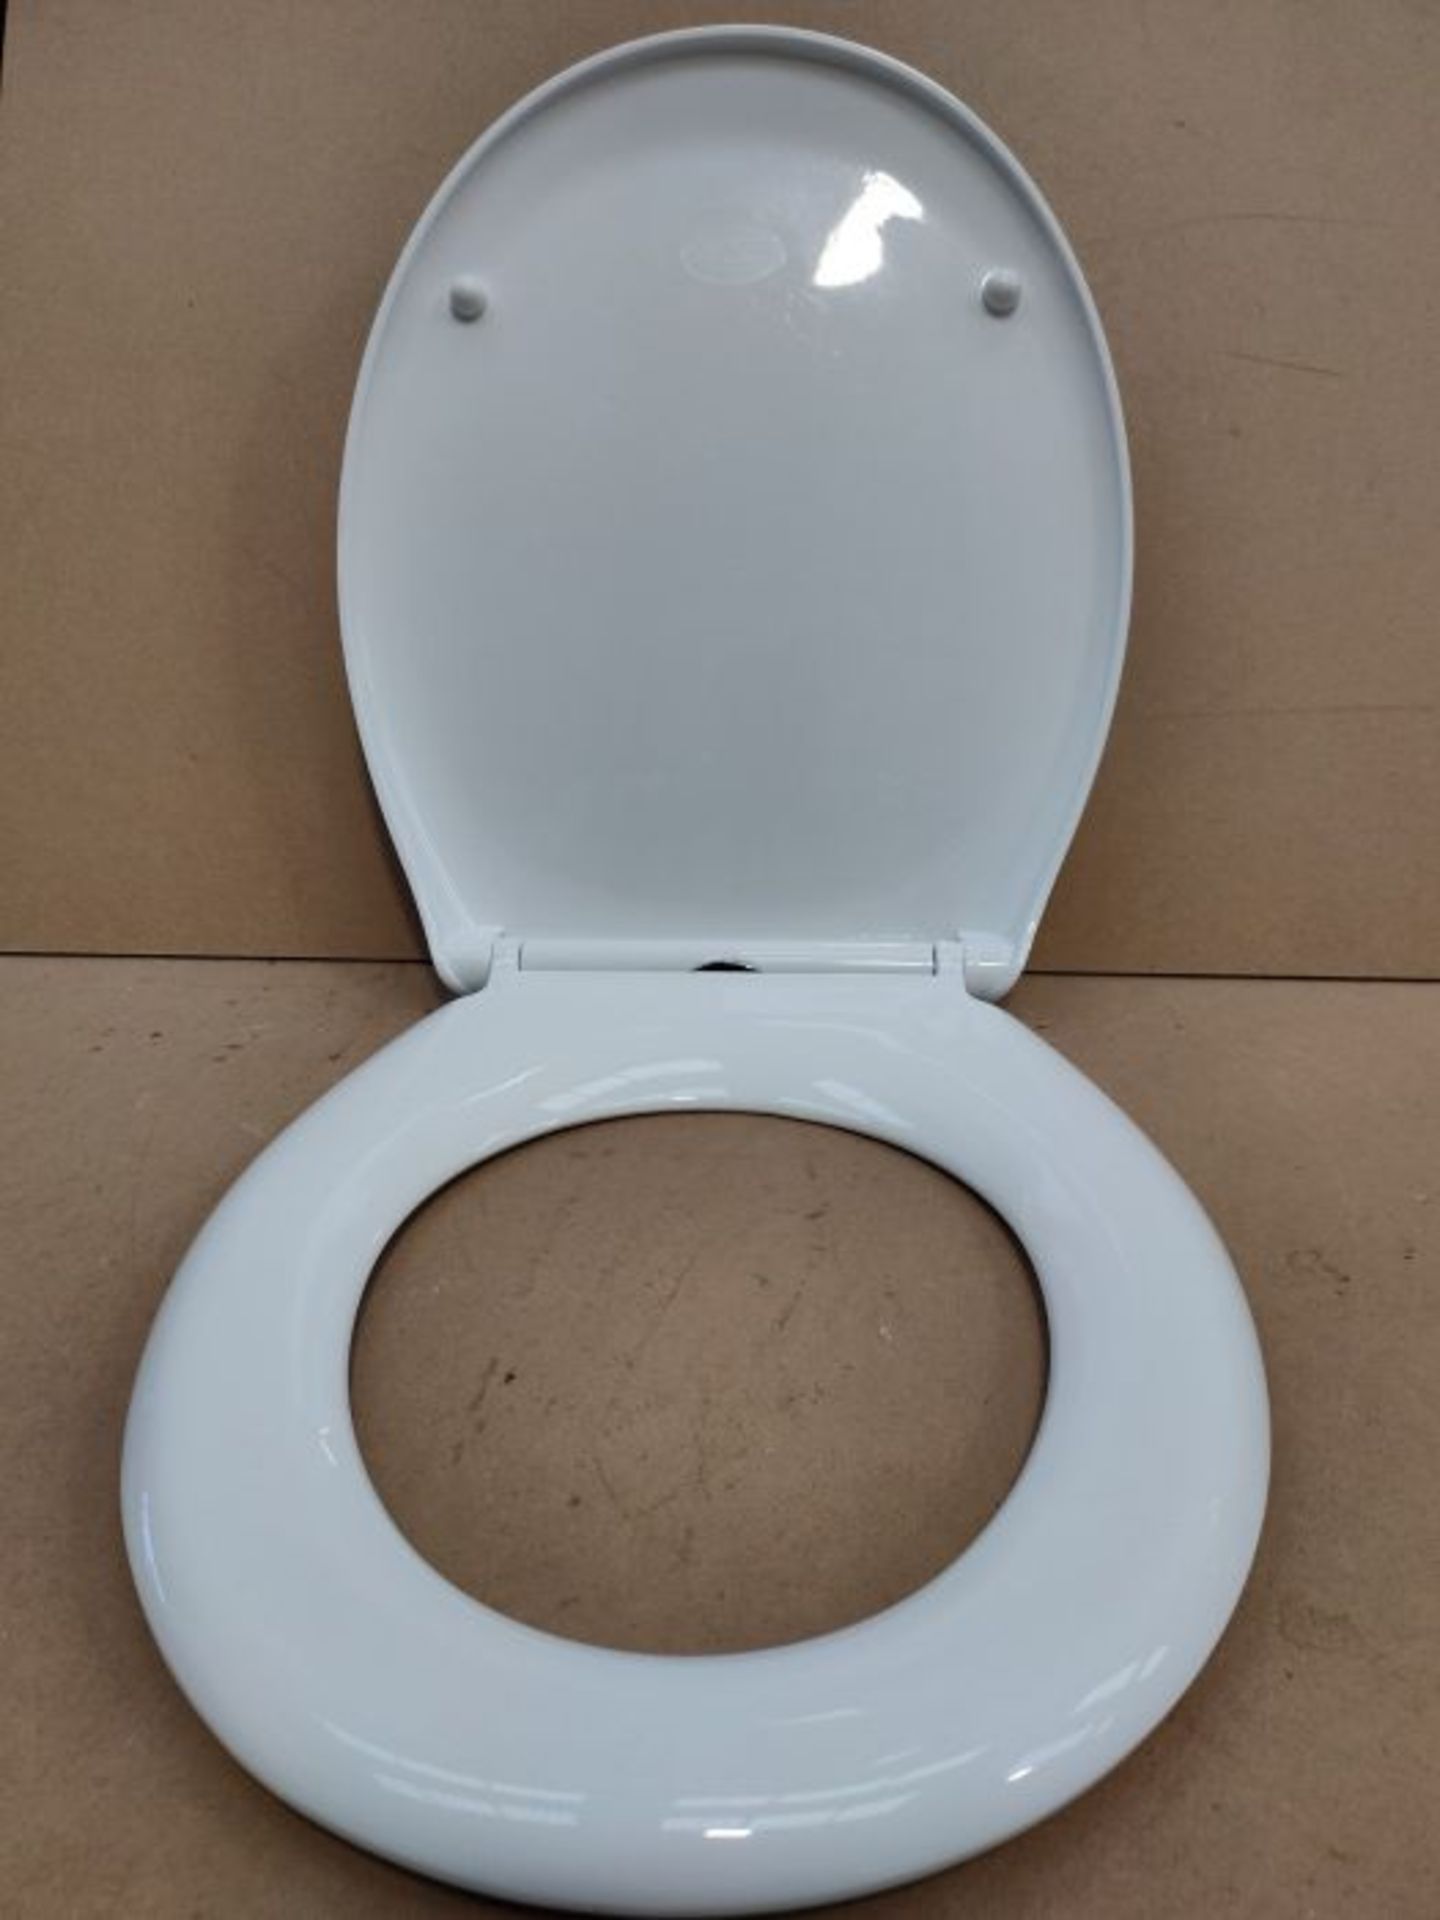 Toilet Seat featuring Soft-Close, Easy Clean, Top Fixing Hinges / OVAL LOO SEAT COVER - Image 2 of 2